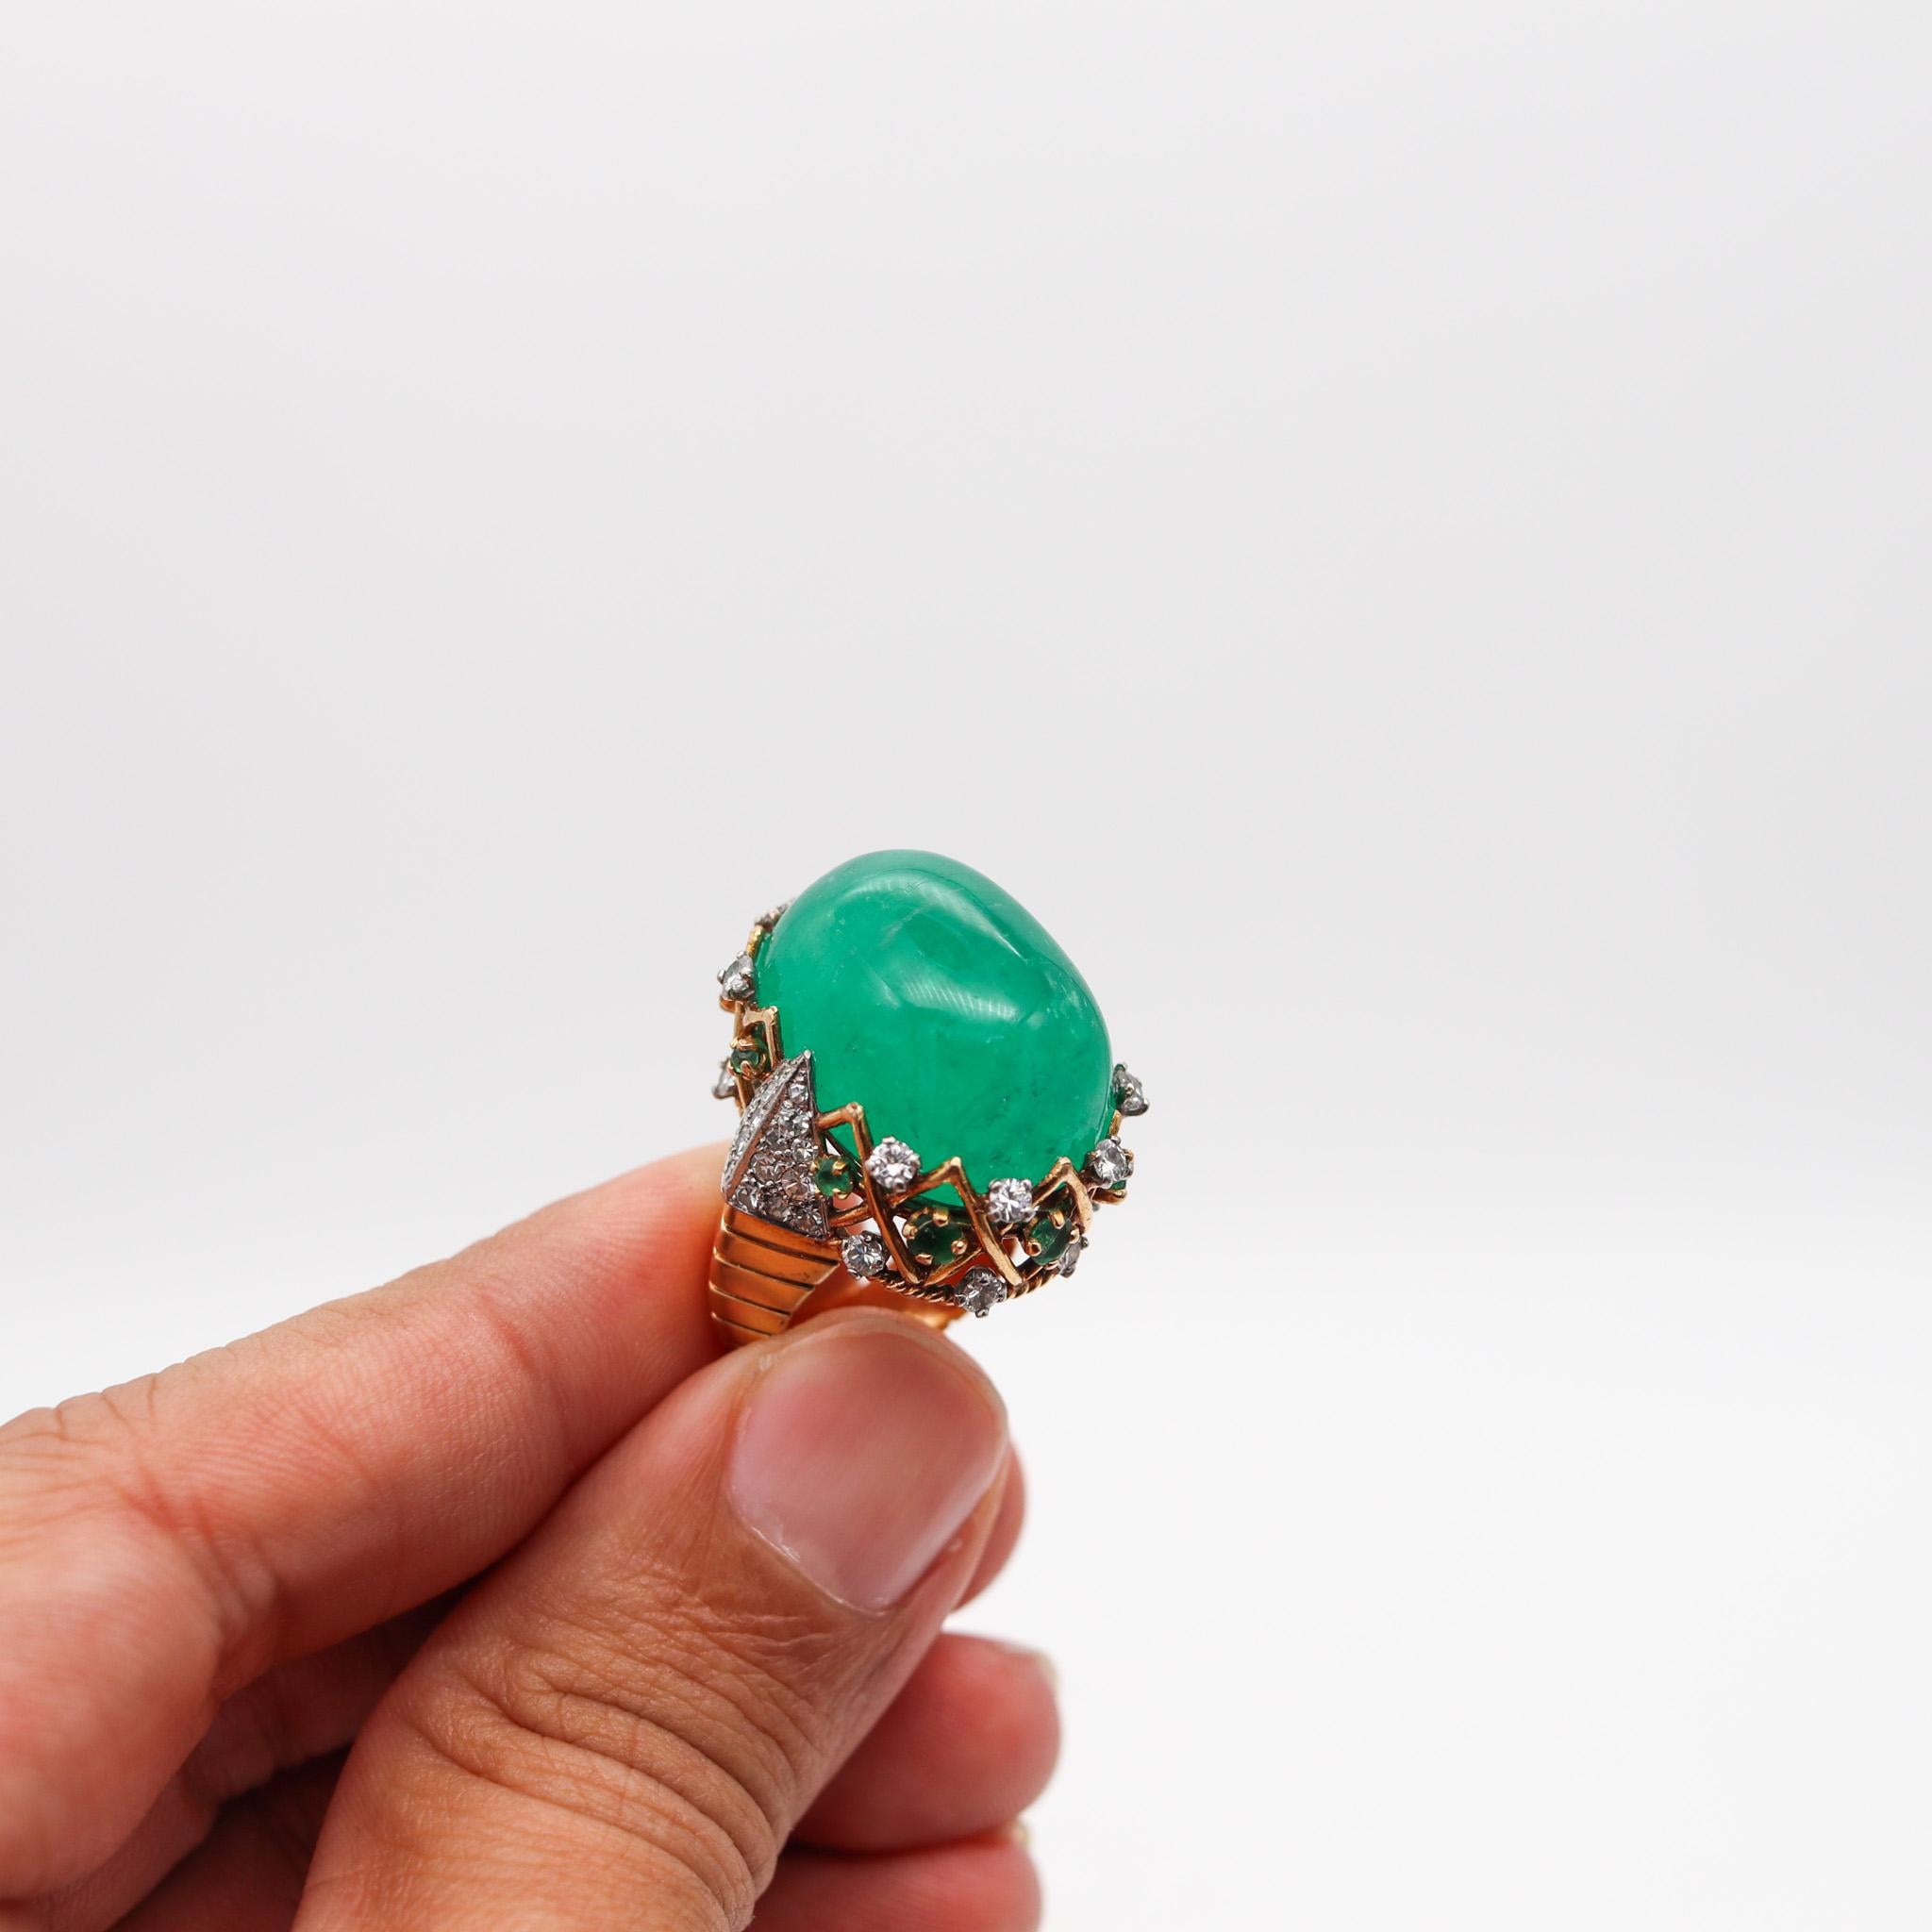 Pierre Sterlé 1950 Modernist Ring In 18Kt Gold And 43.43 Ctw Emeralds & Diamonds 1